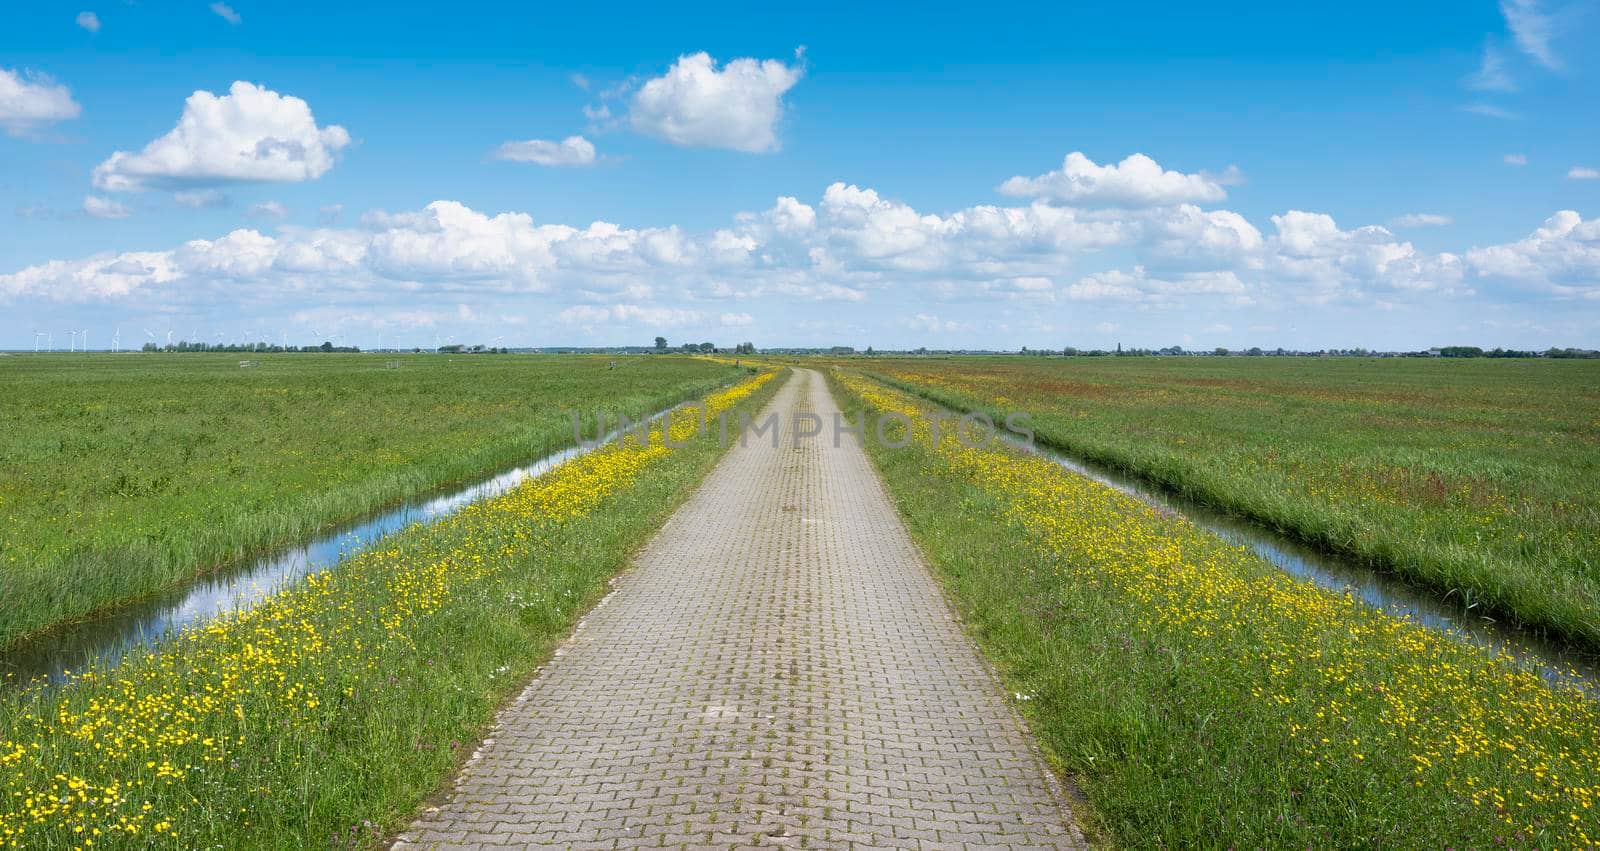 brick country road with wild yellow flowers under blue sky in holland by ahavelaar